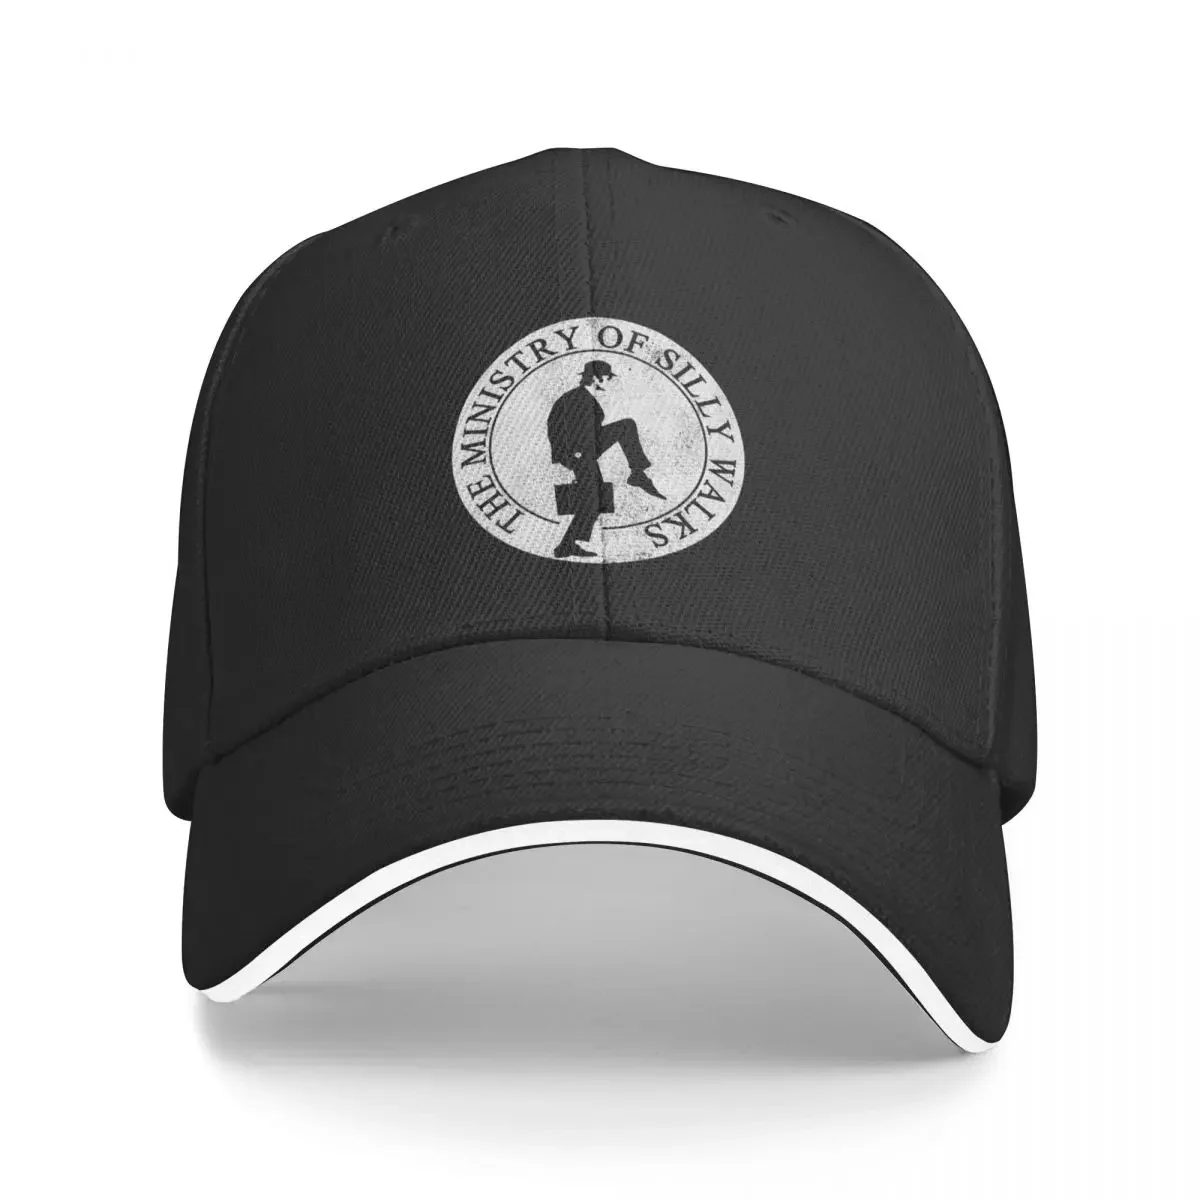 

New Ministry Of Silly Walks - Distressed Look Baseball Cap boonie hats Rugby New Hat Military Tactical Caps Hats For Men Women's